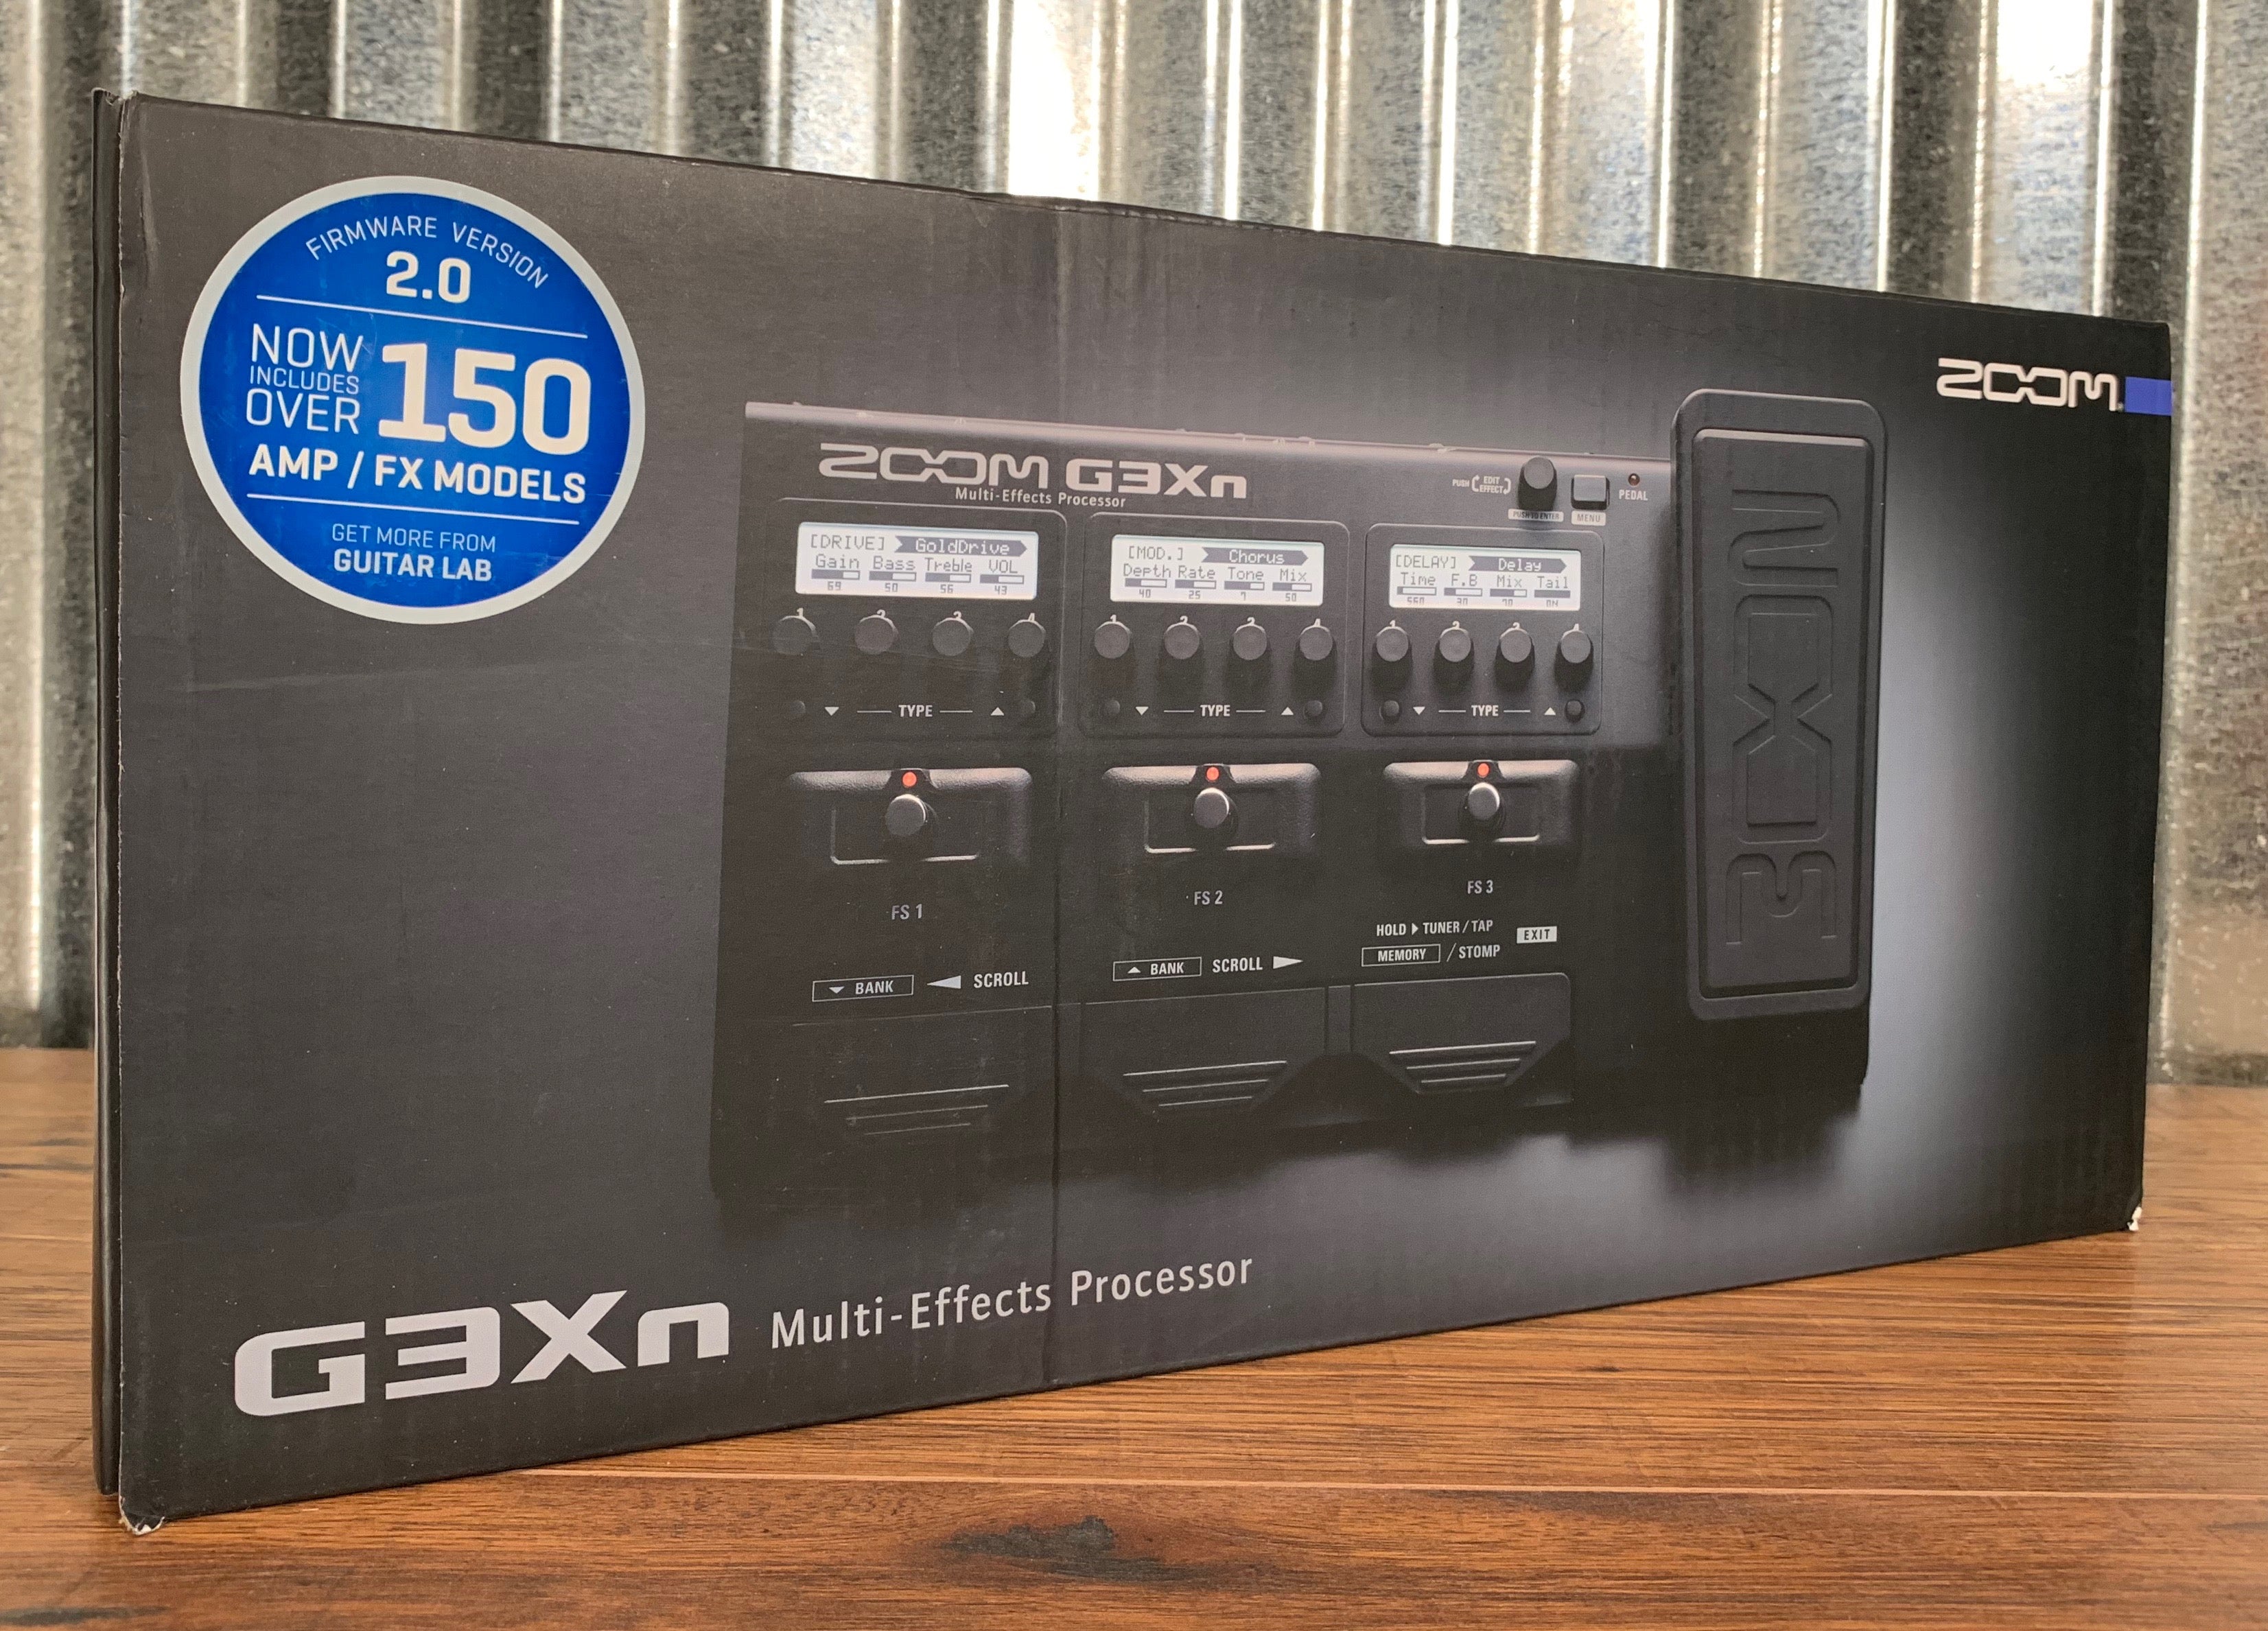 Zoom G3Xn Multi Effect Processor & Expression Guitar Effect Pedal